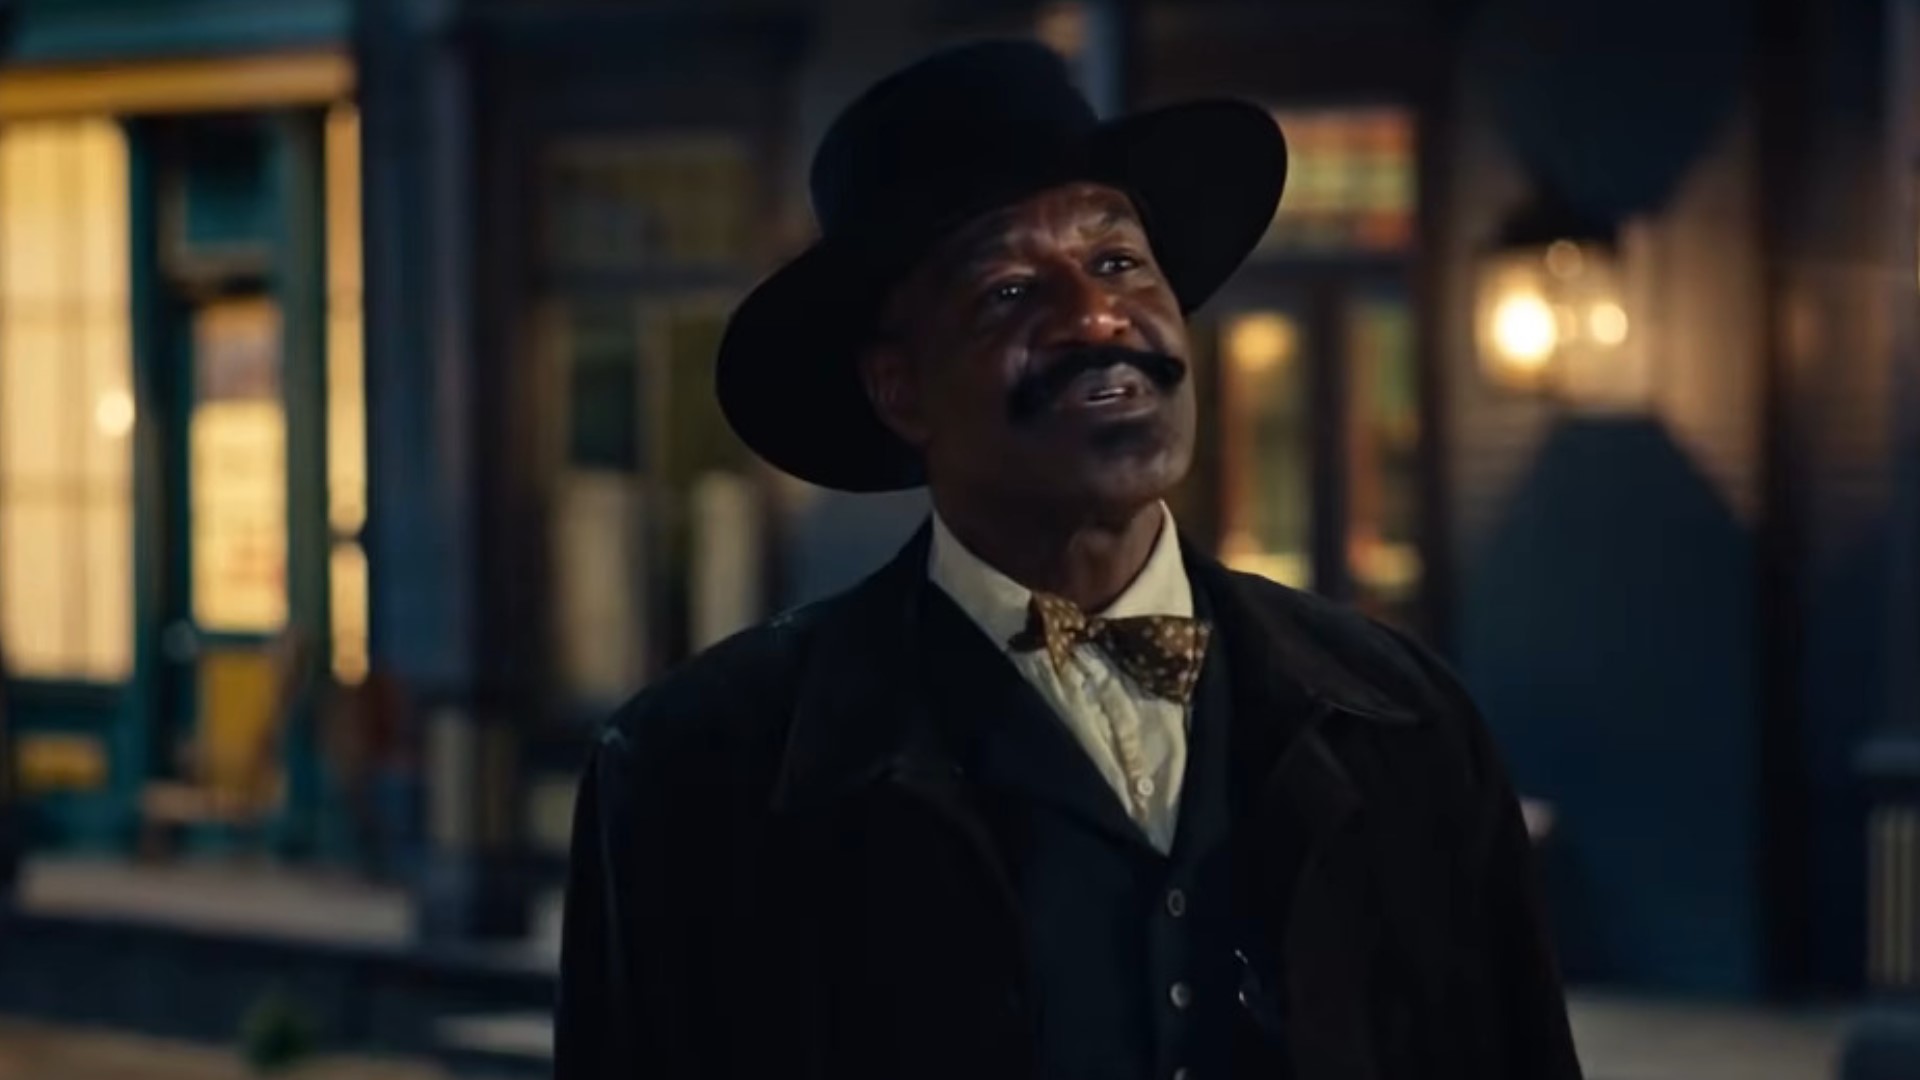 U.S. Marshal Bass Reeves featured in new Netflix film